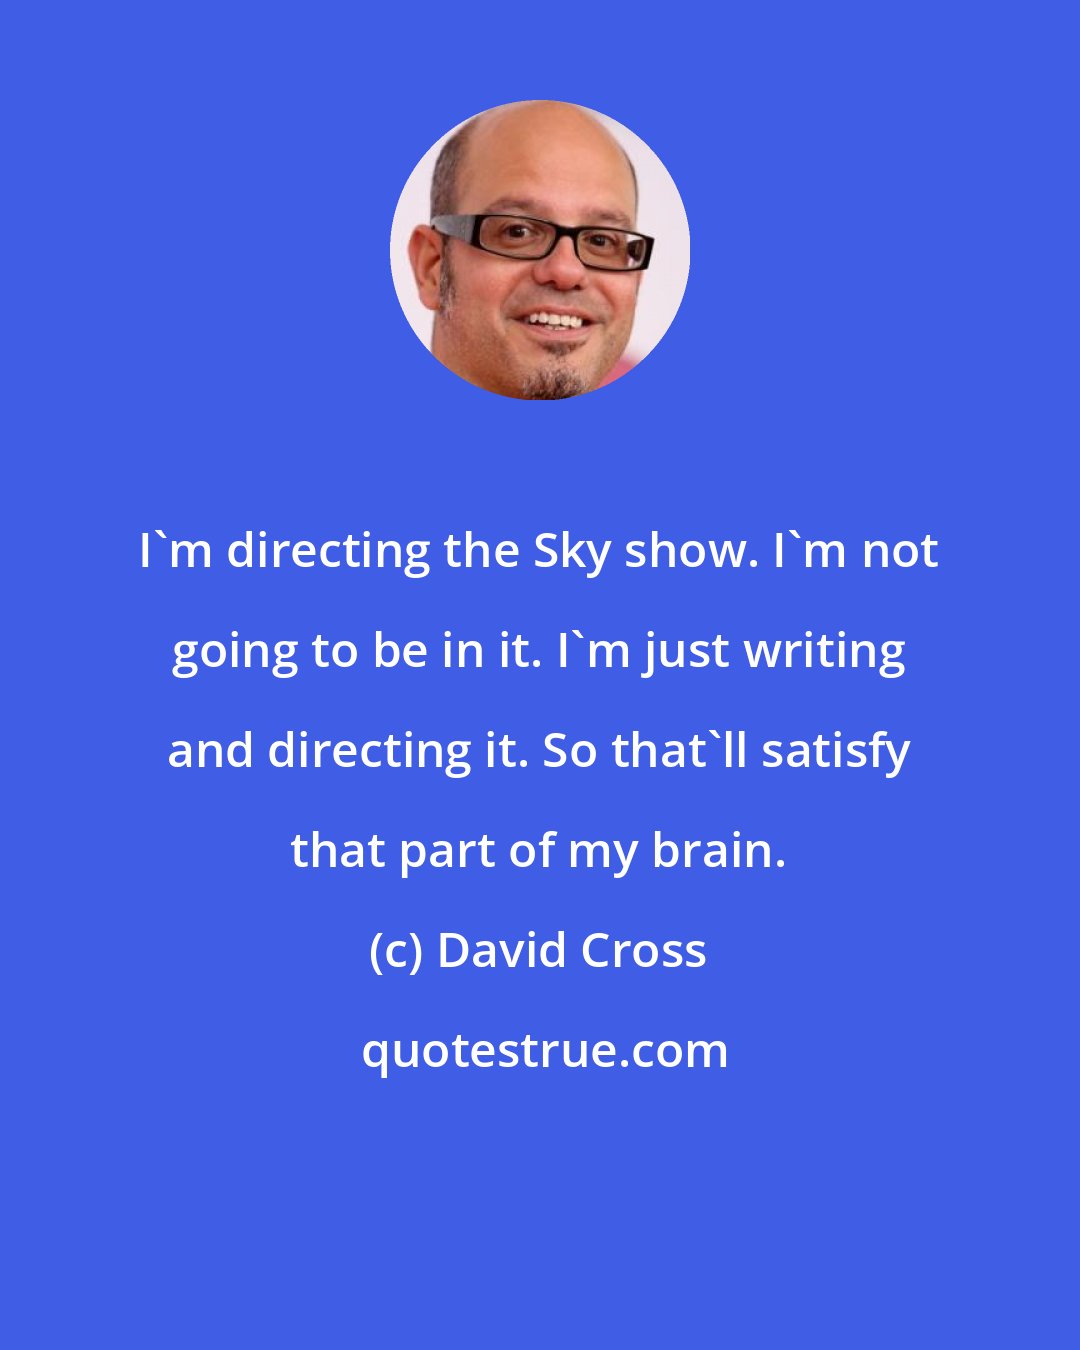 David Cross: I'm directing the Sky show. I'm not going to be in it. I'm just writing and directing it. So that'll satisfy that part of my brain.